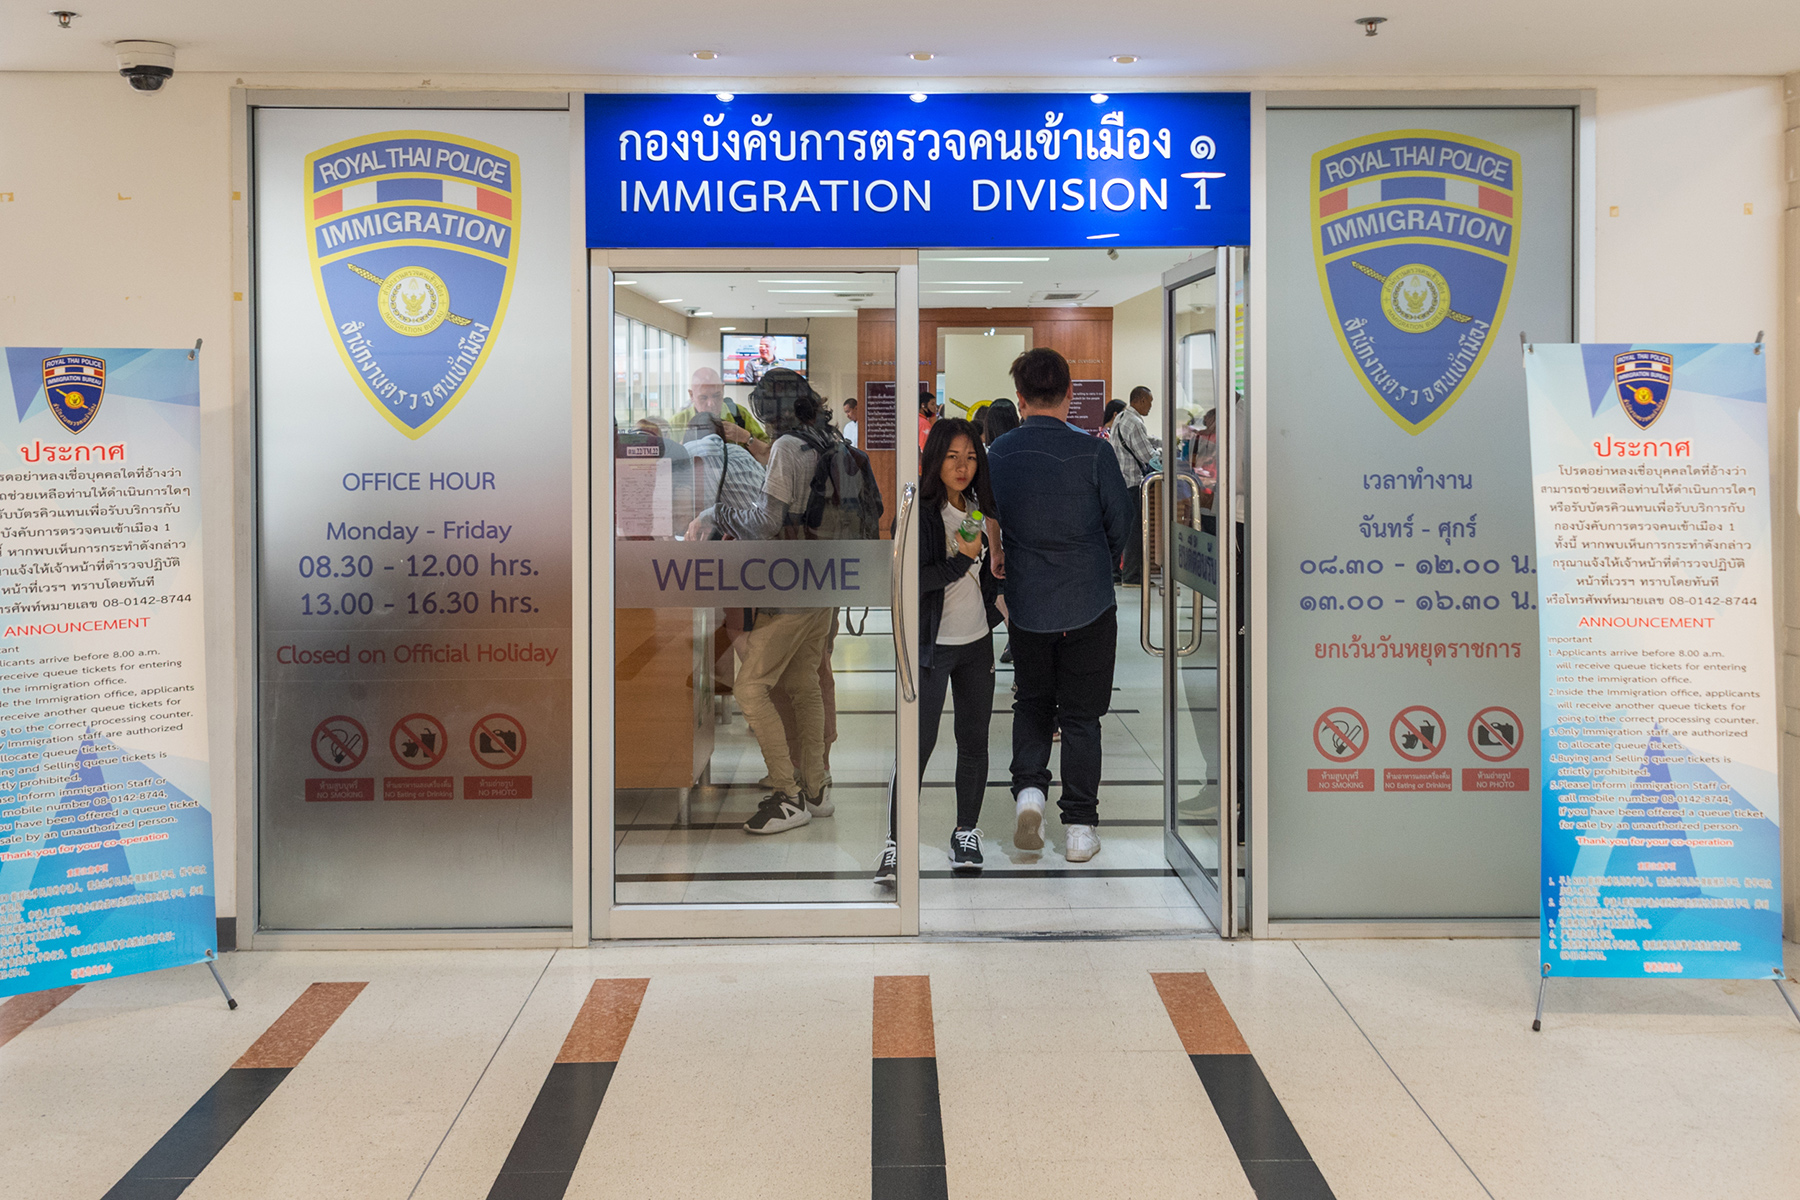 Immigration office with people going in and out